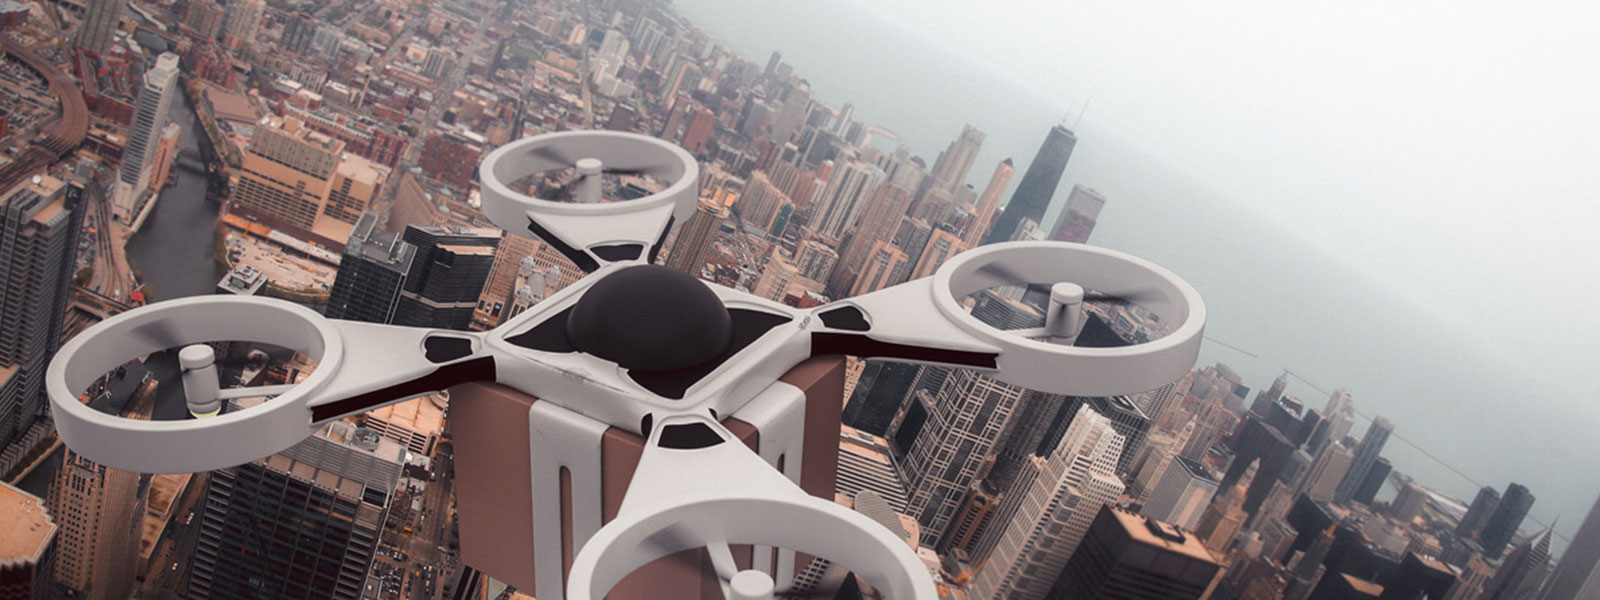 Drone Zones: How will drones change our world?